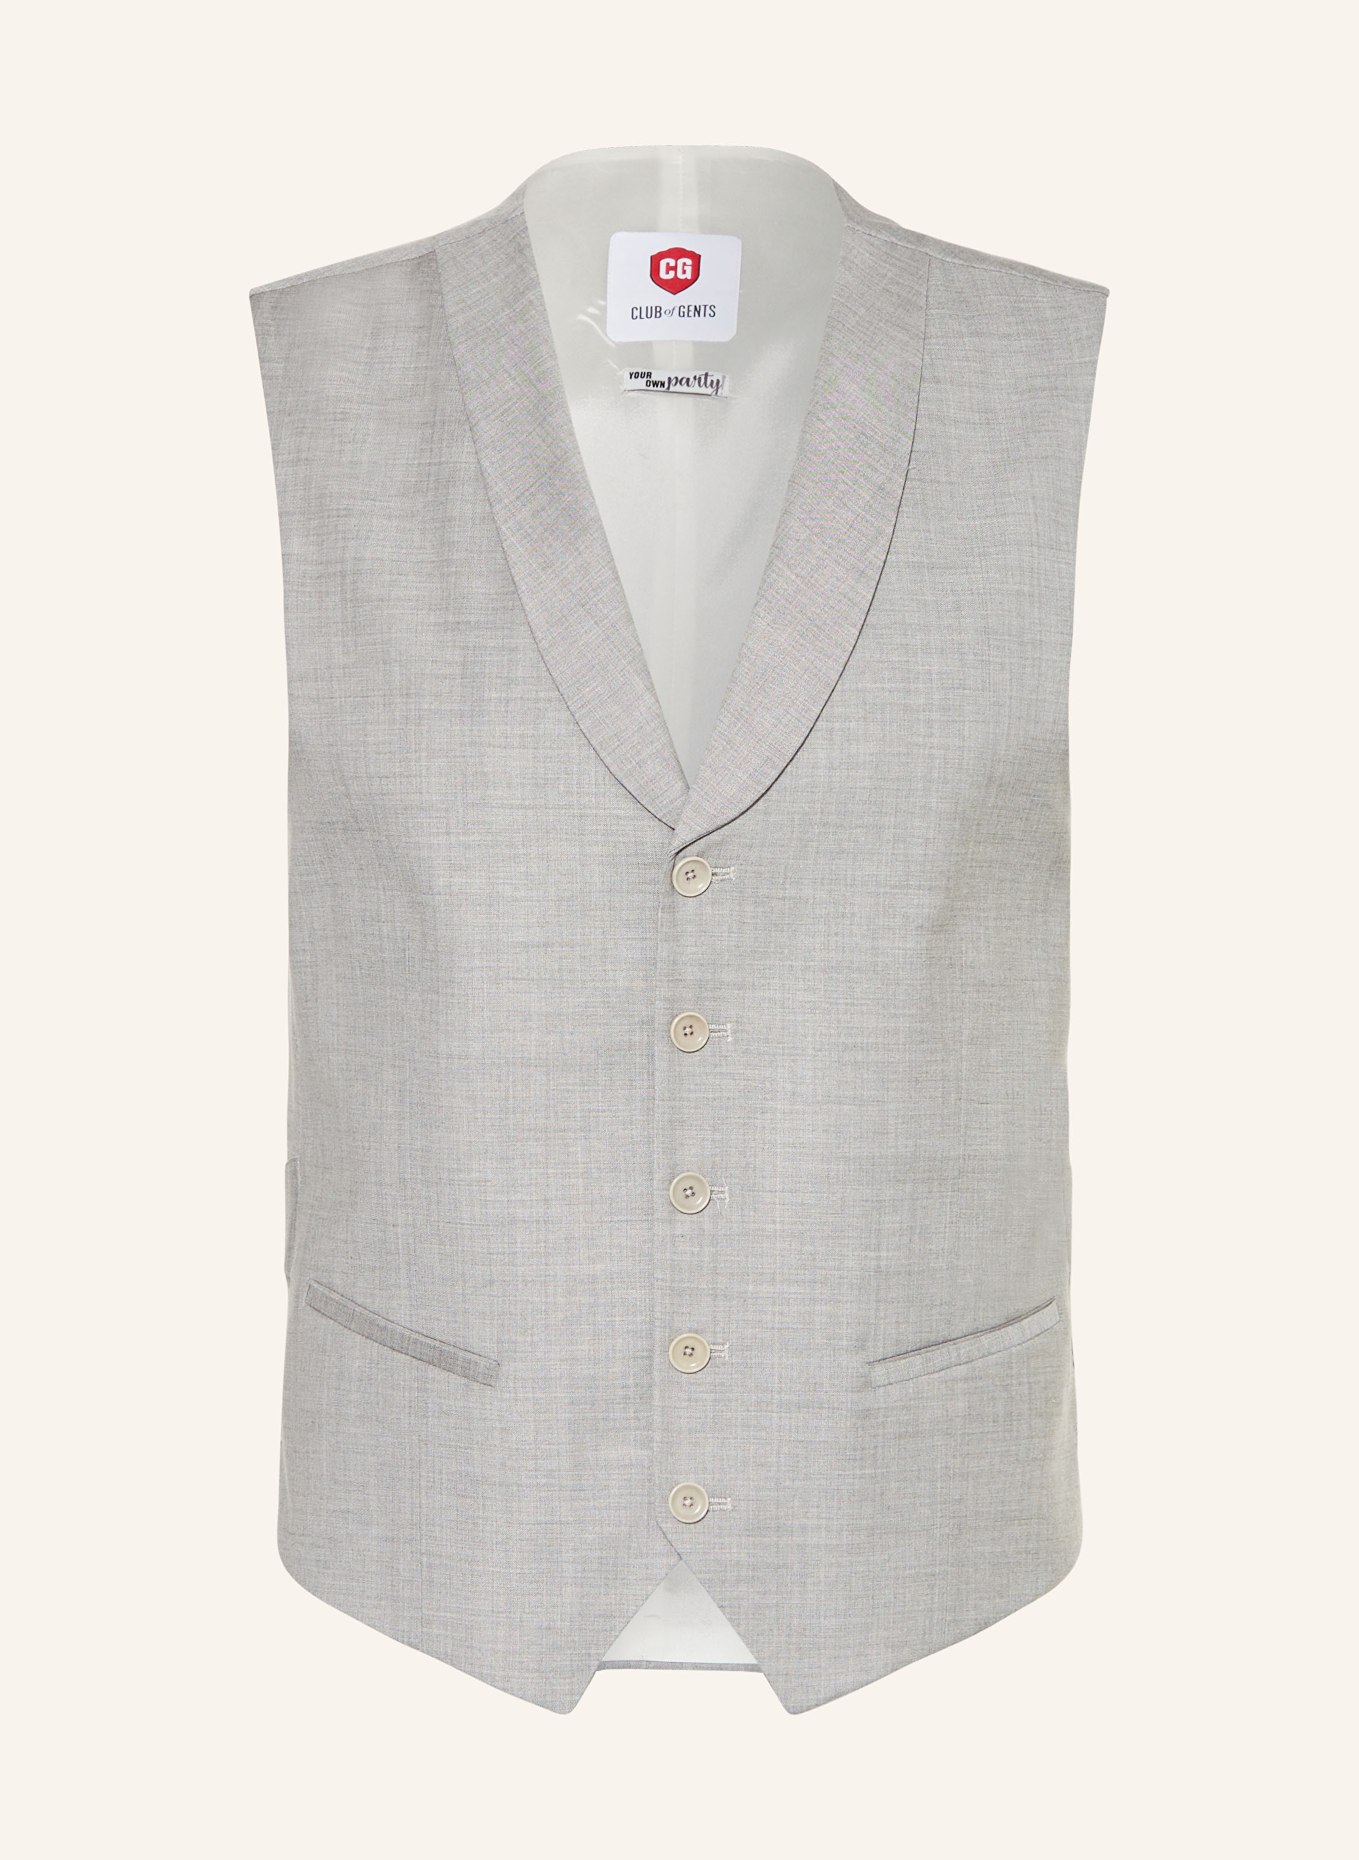 CG - CLUB of GENTS Suit vest CG PADDY extra slim fit, Color: 81 grau hell (Image 1)